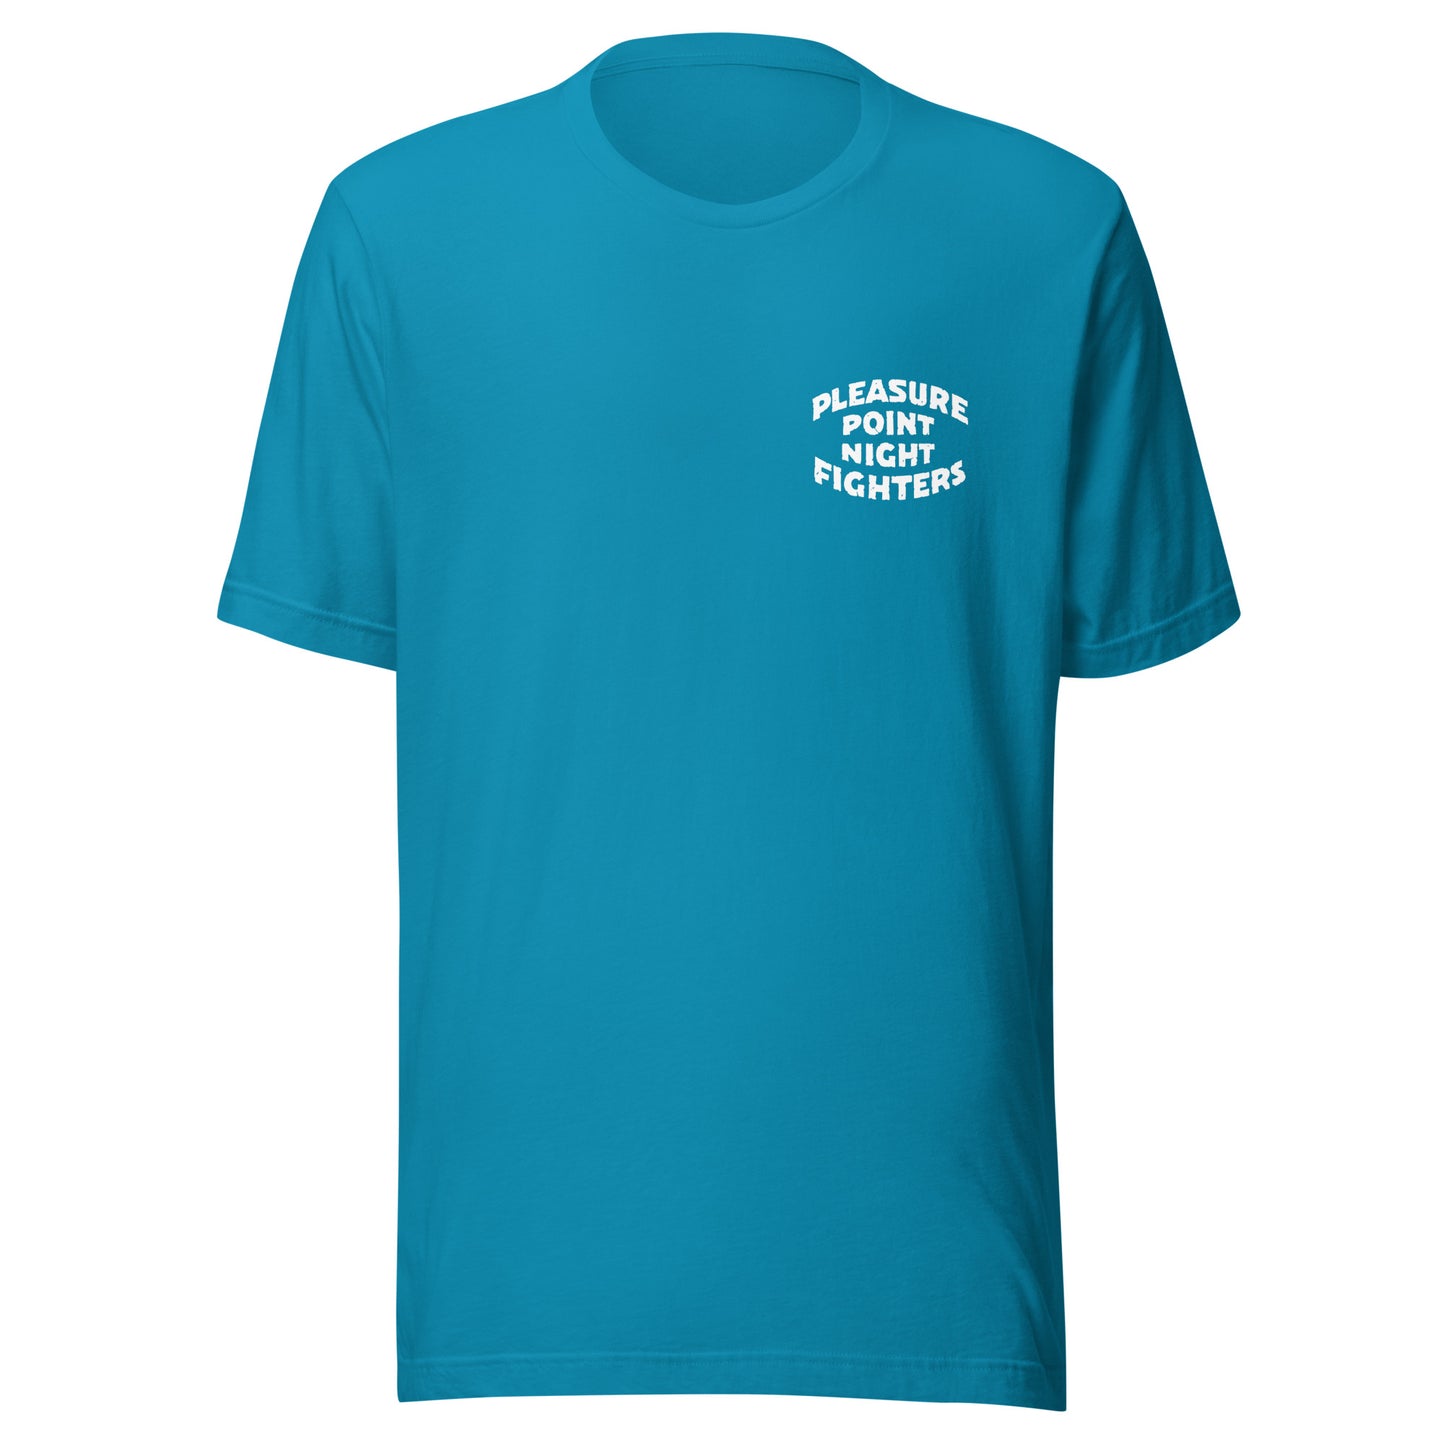 PPPNF - Pleaasure Point Night Fighters - Logo -Unisex t-shirt